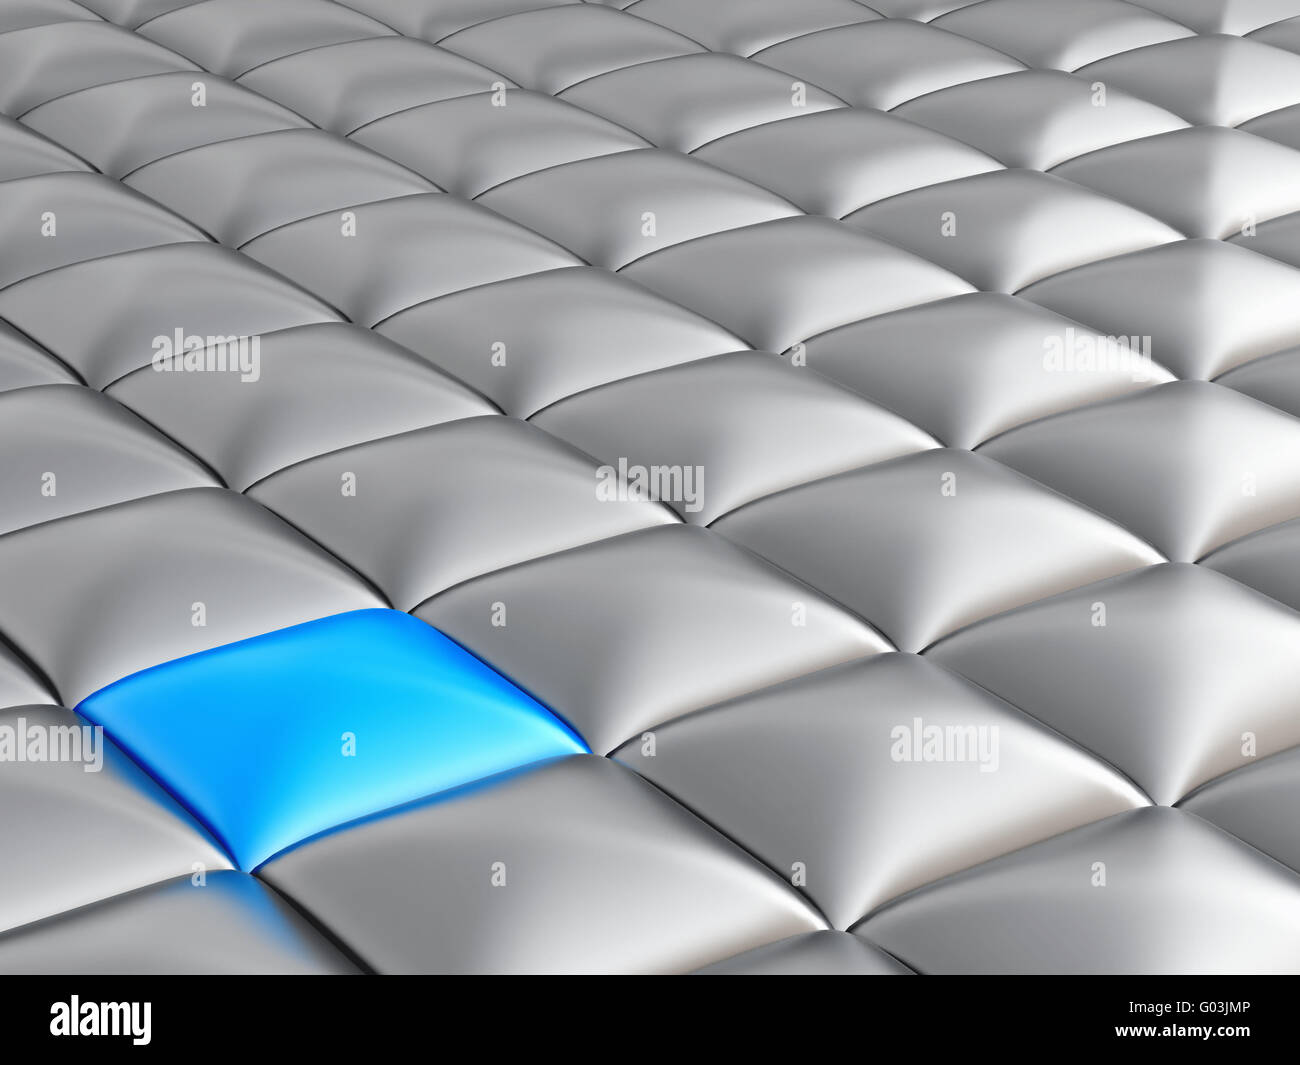 abstract smooth grey metallic cubes with a contras Stock Photo